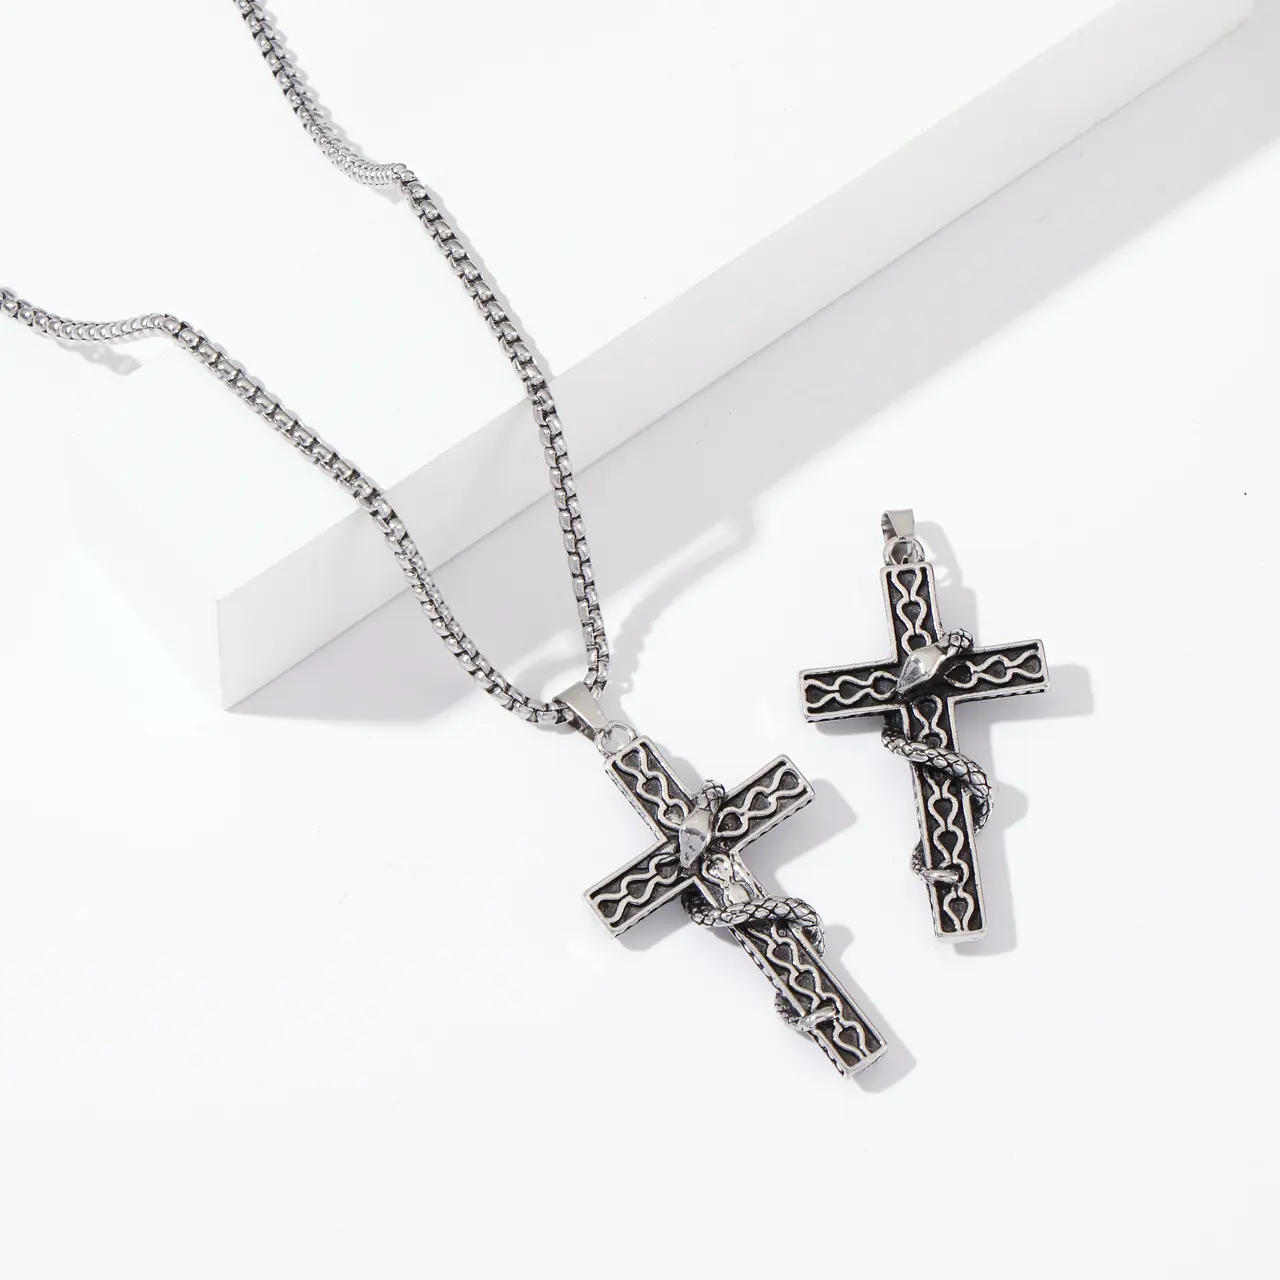 religious fashion fine jewelry necklaces snake wrapped cross animal pendant hiphop pendant necklace for men accessories jewelry